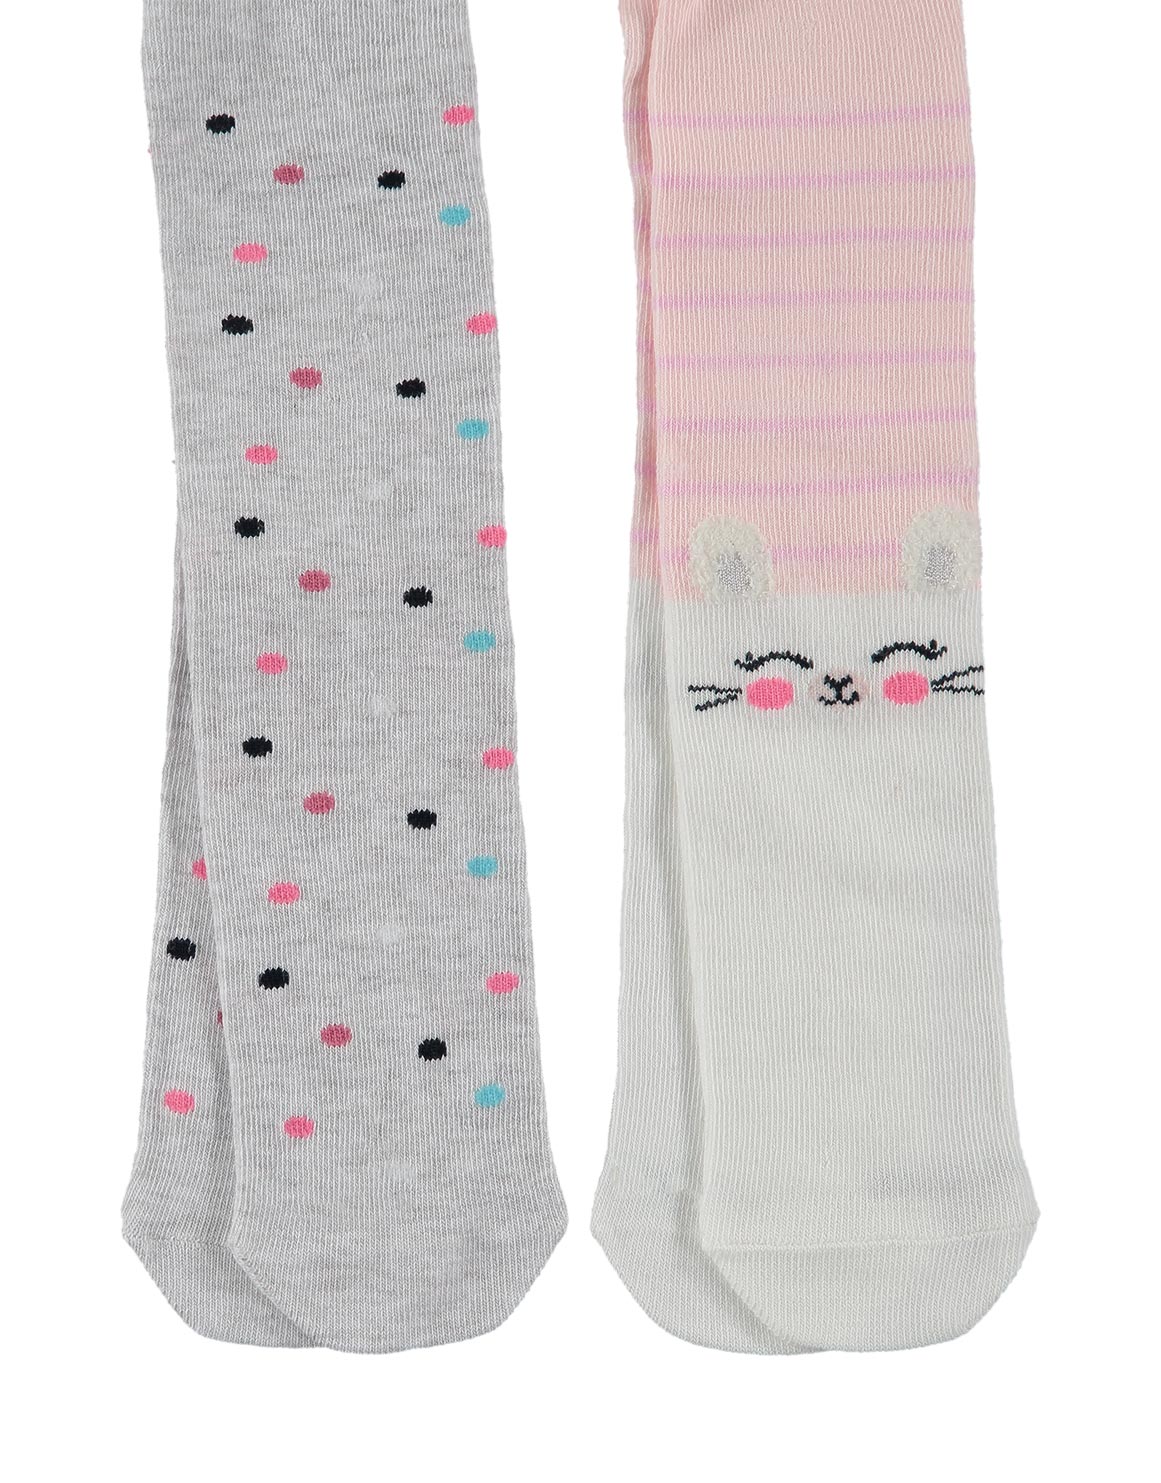 2PK BUNNY TIGHTS - Woolworths Mauritius Online